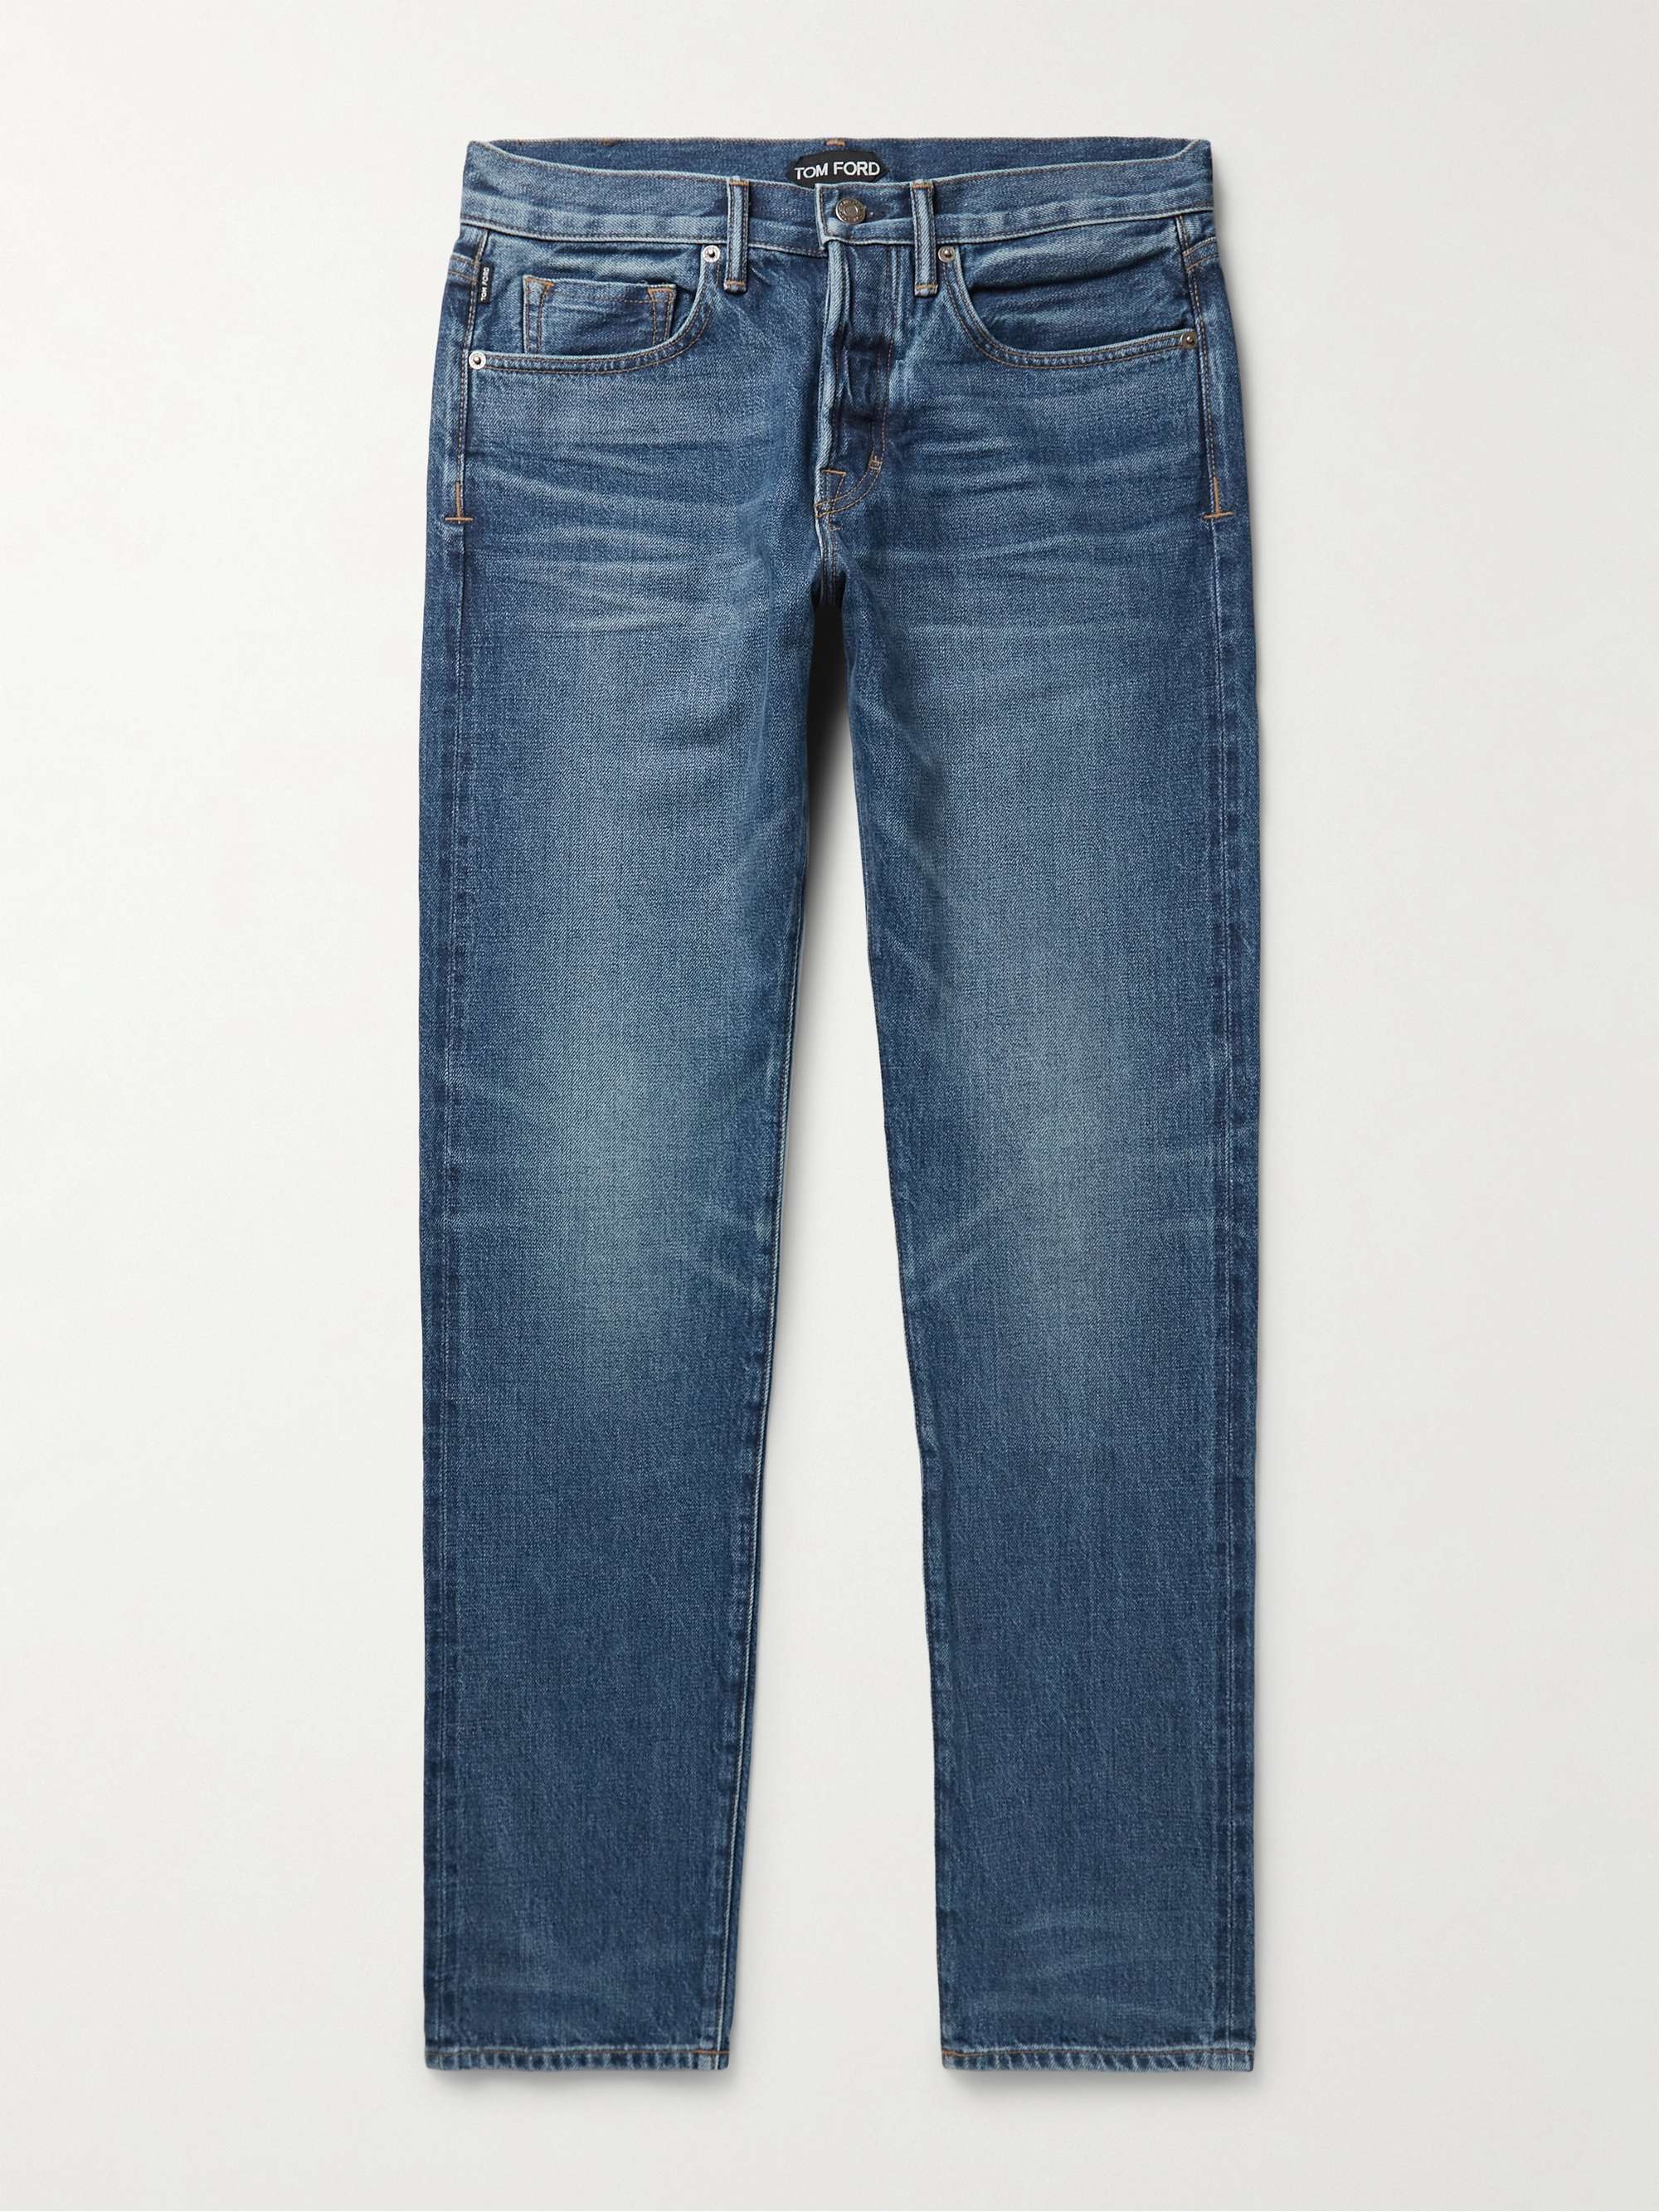 TOM FORD Straight-Leg Garment-Washed Selvedge Jeans